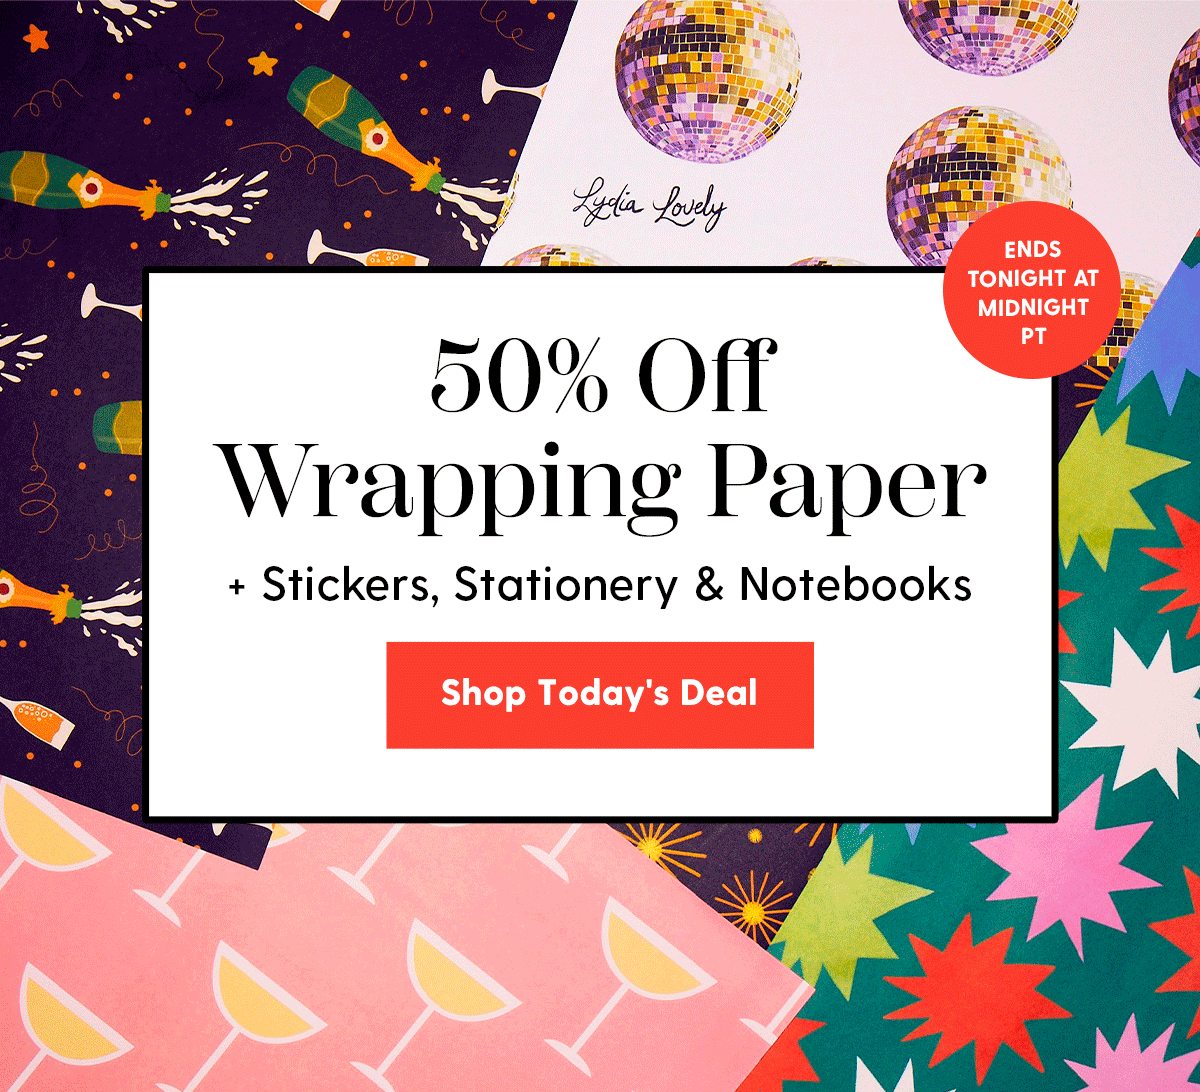 50% Off Wrapping Paper + Stickers, Stationery & Notebooks | Shop Today's Deal | Ends at midnight PT.